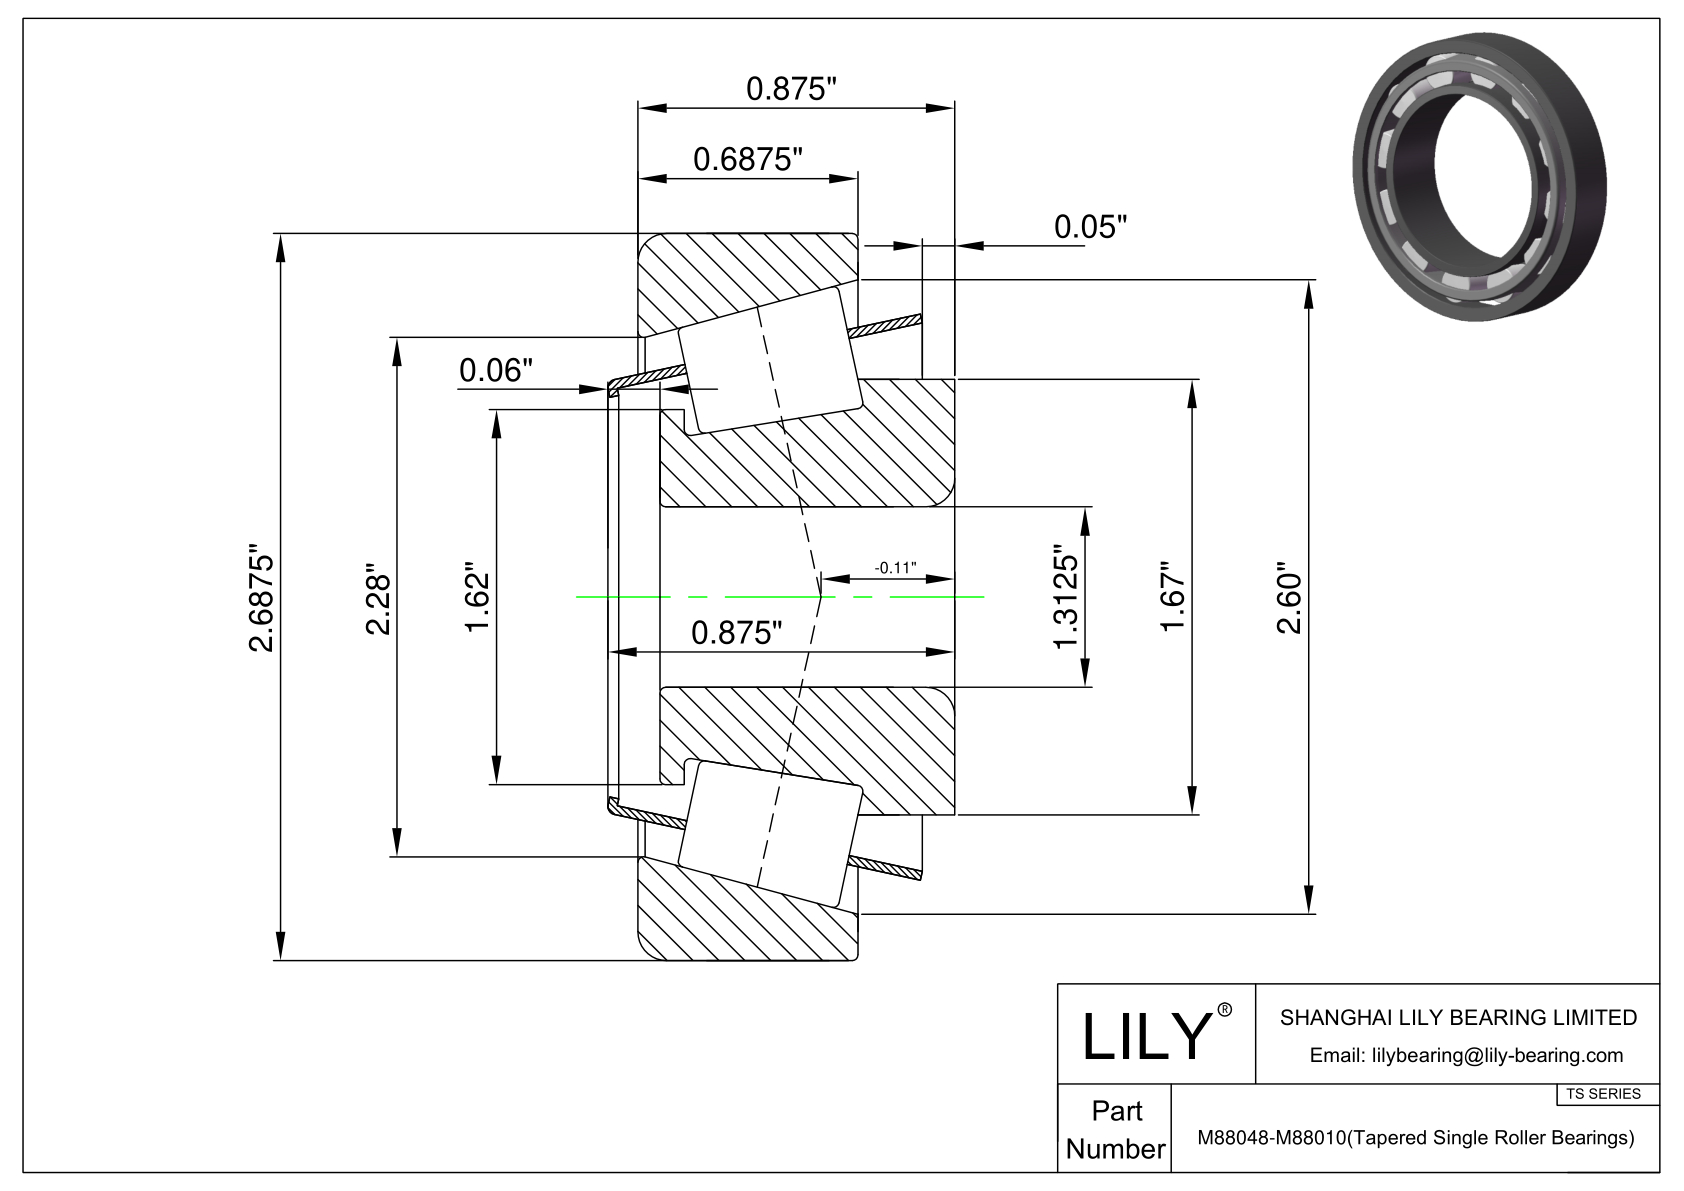 M88048-M88010 TS (Tapered Single Roller Bearings) (Imperial) cad drawing